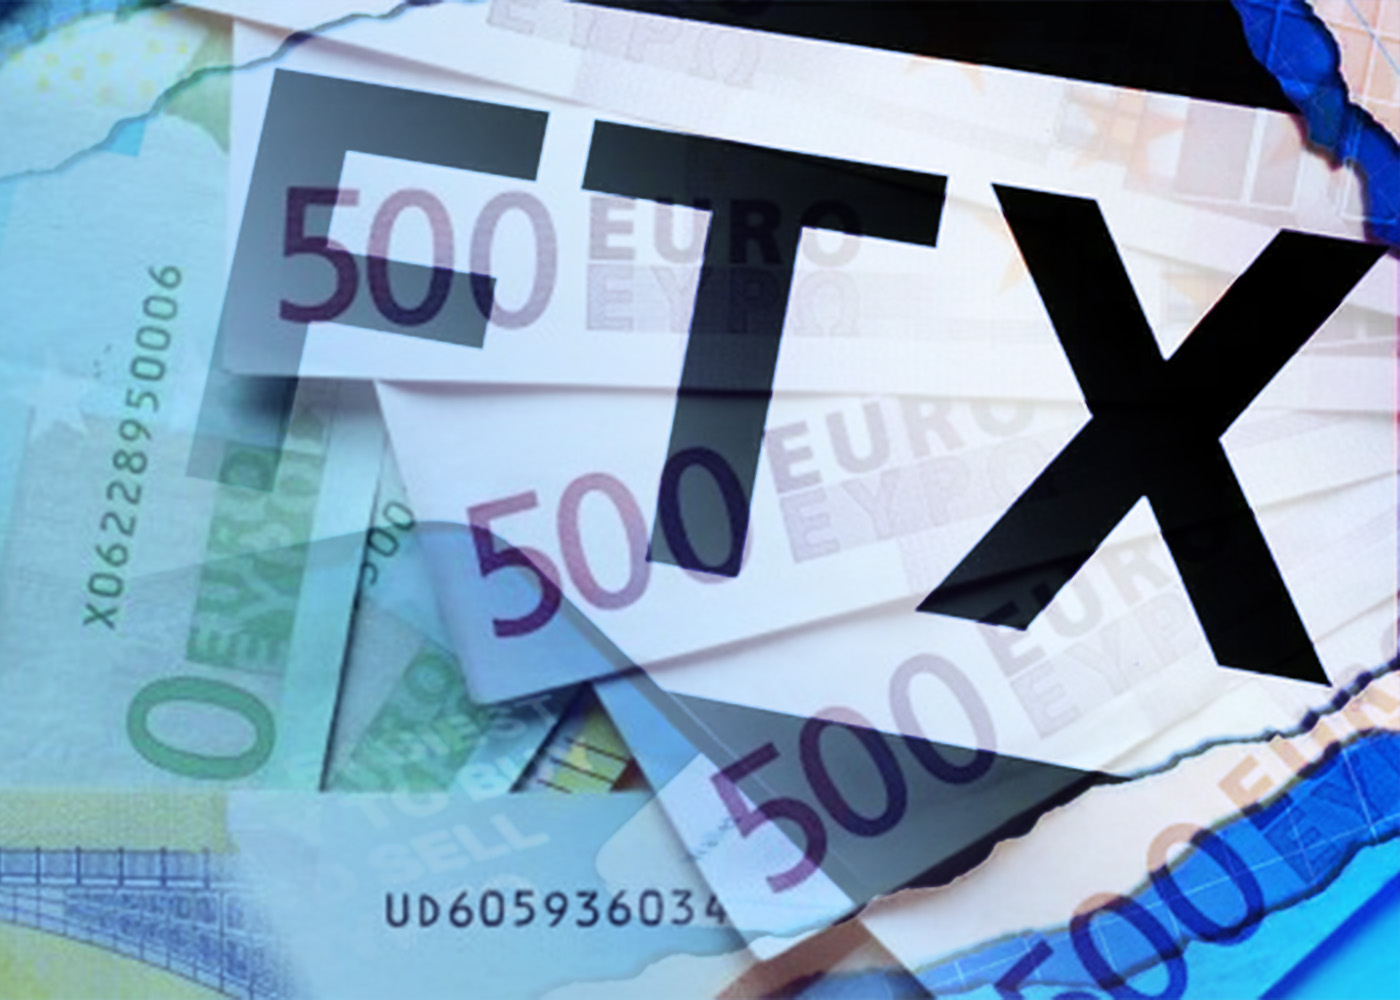 Will European FTX Users Really Get Their Money Back?